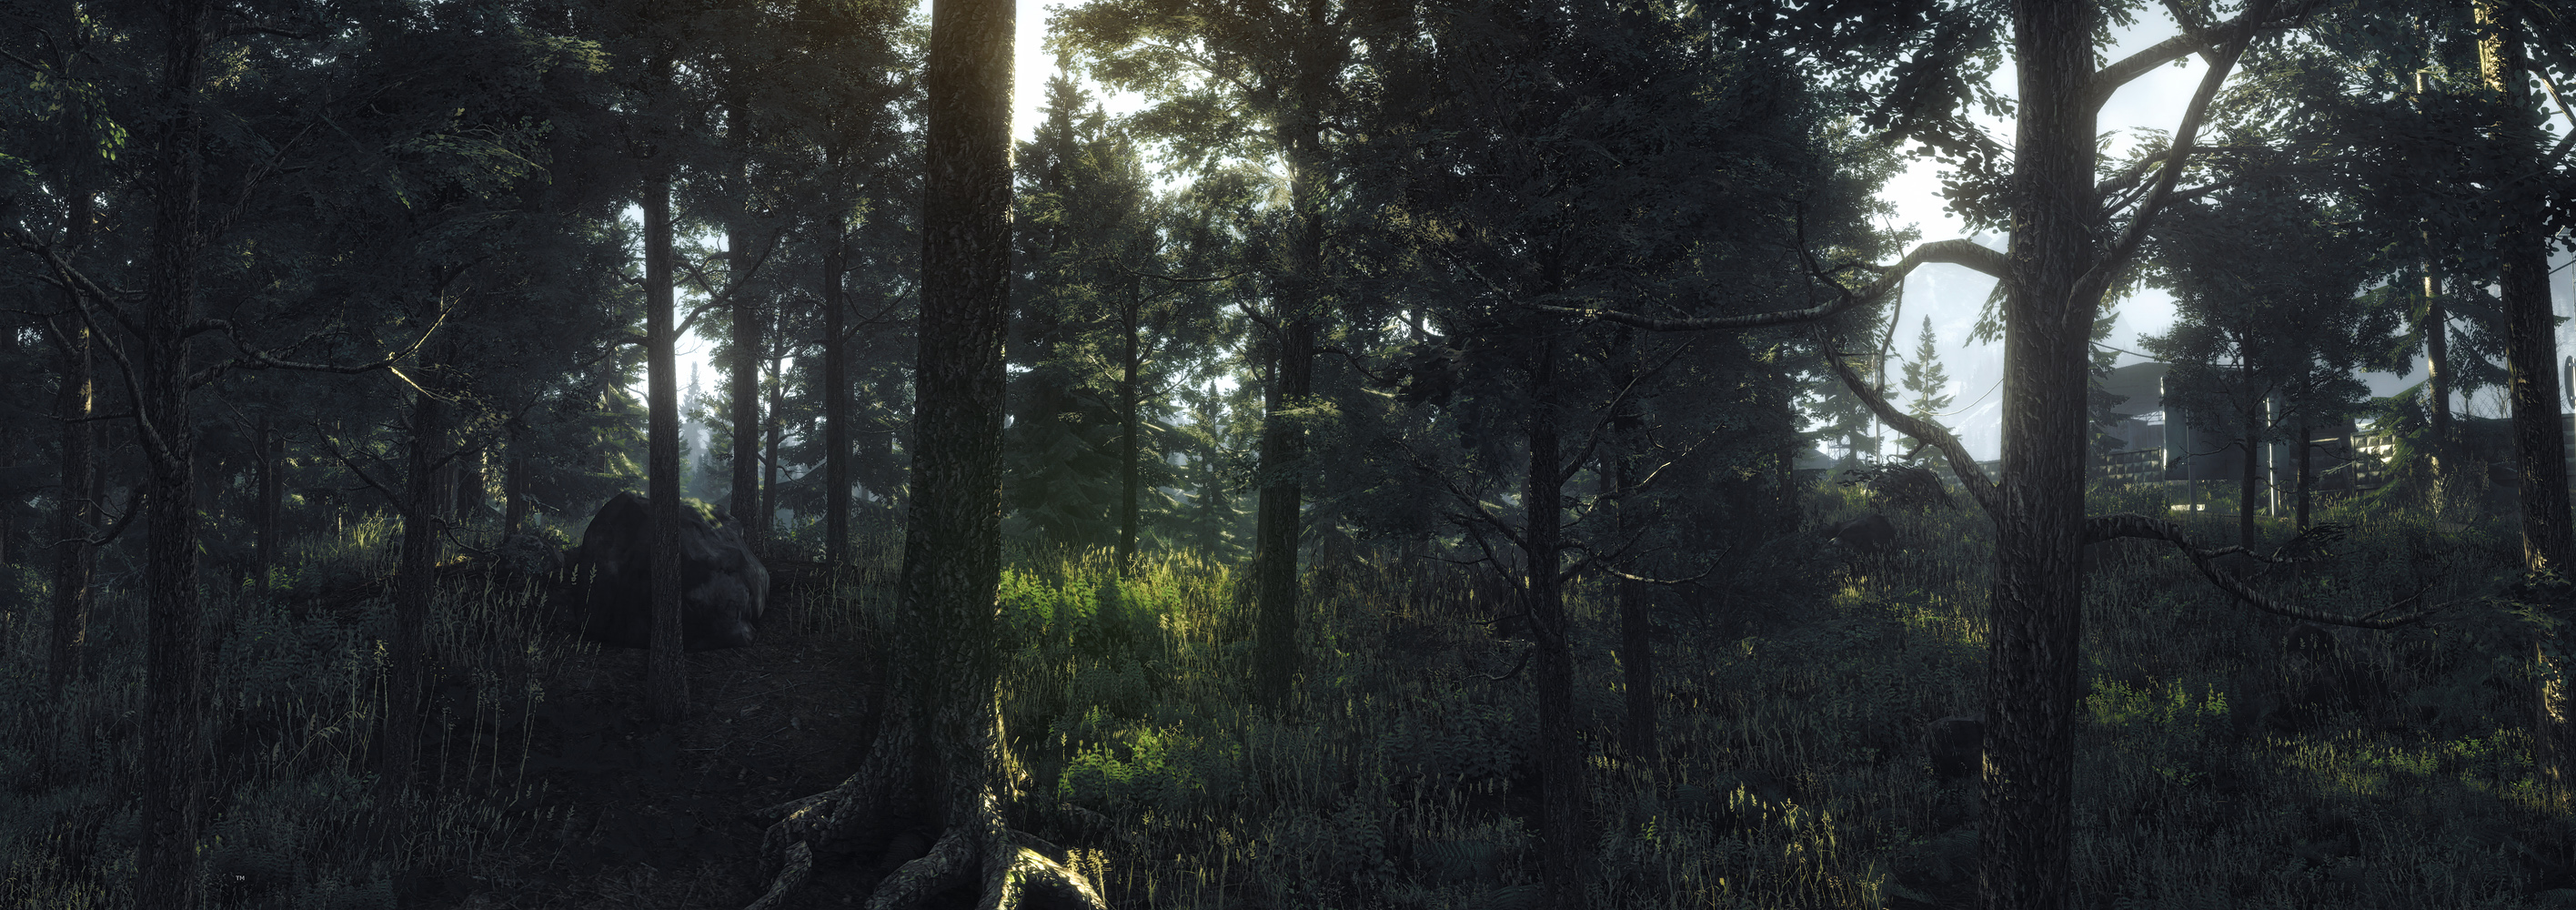 forest_by_trainfender-d34uxks.jpg